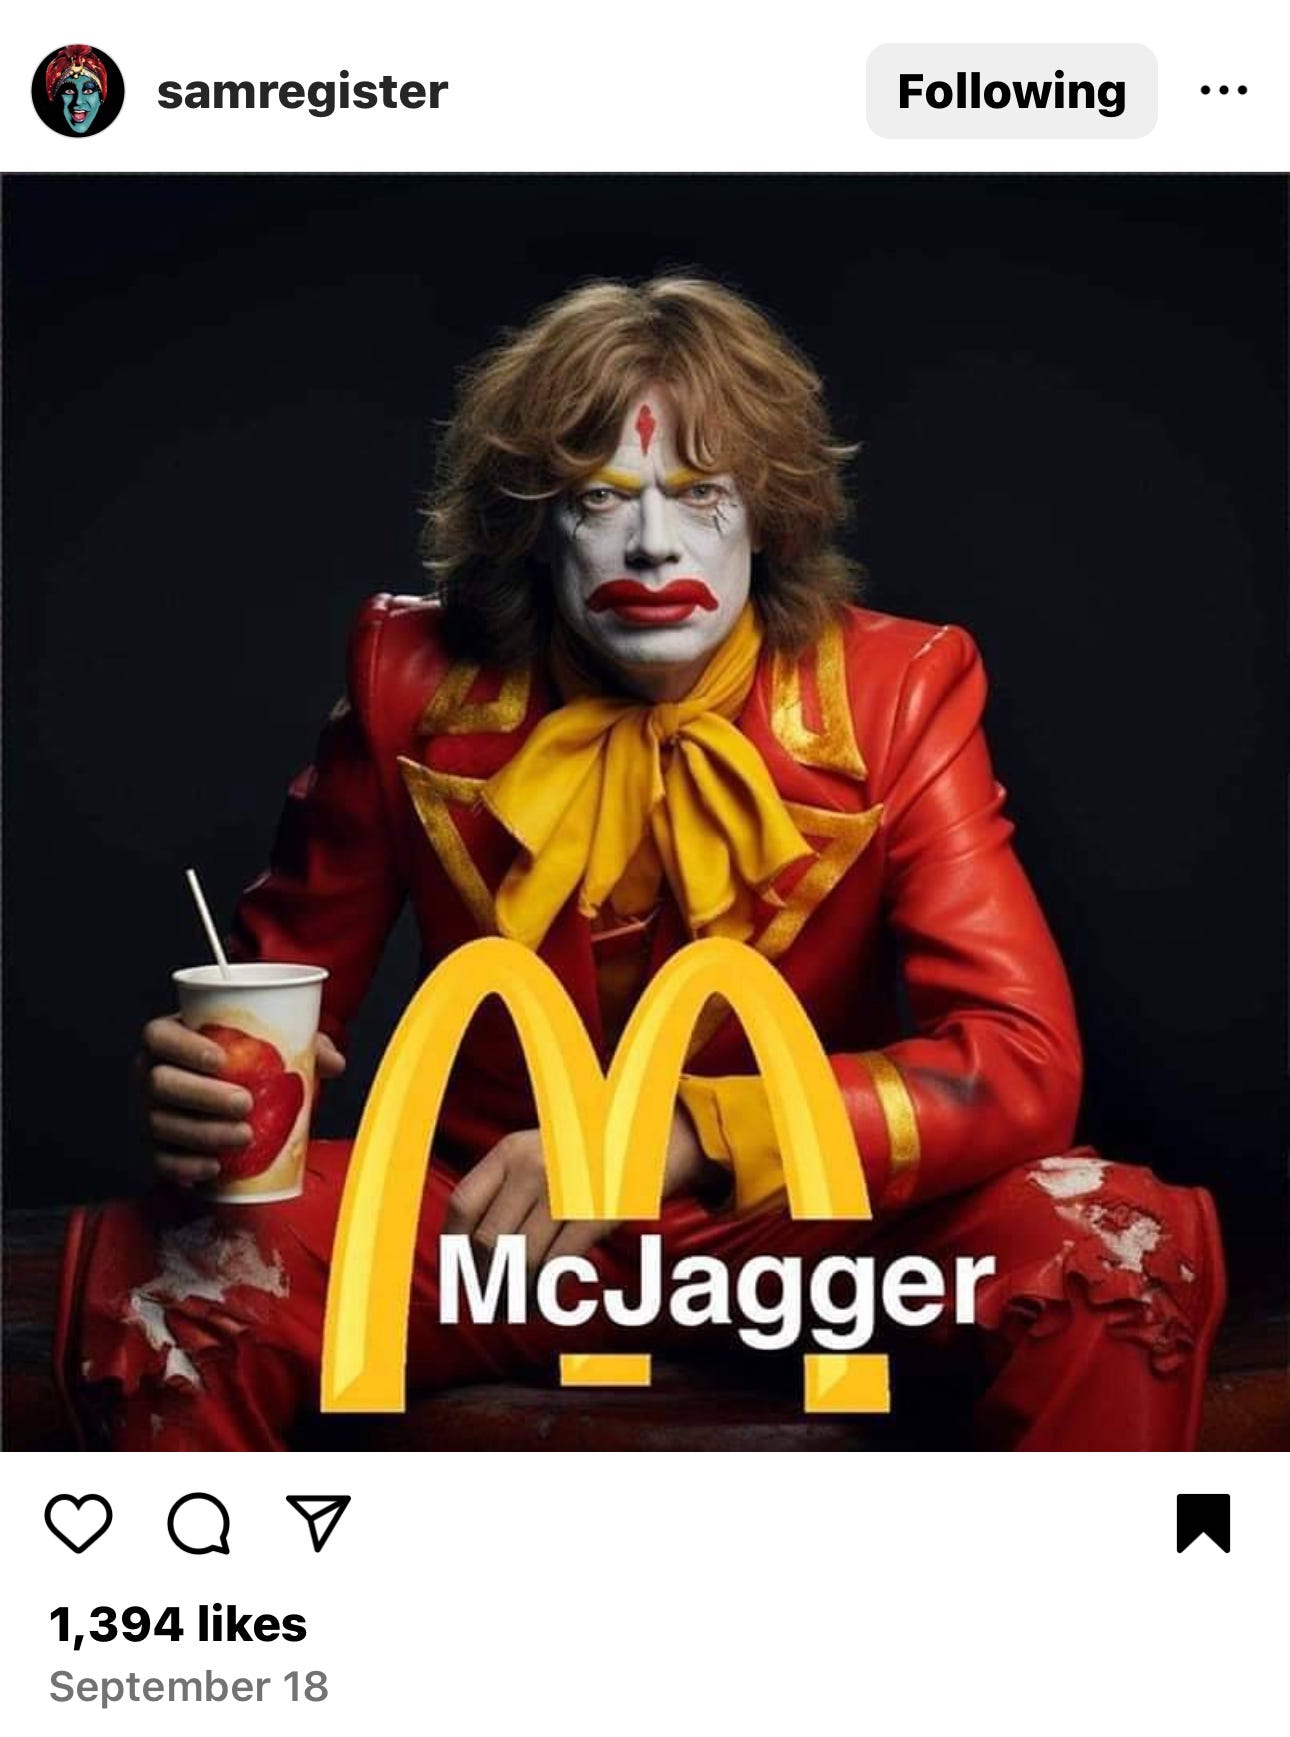 A fake McDonald's ad featuring Mick Jagger frowning while dressed as a clown with the McDonald's logo rendered to read McJagger